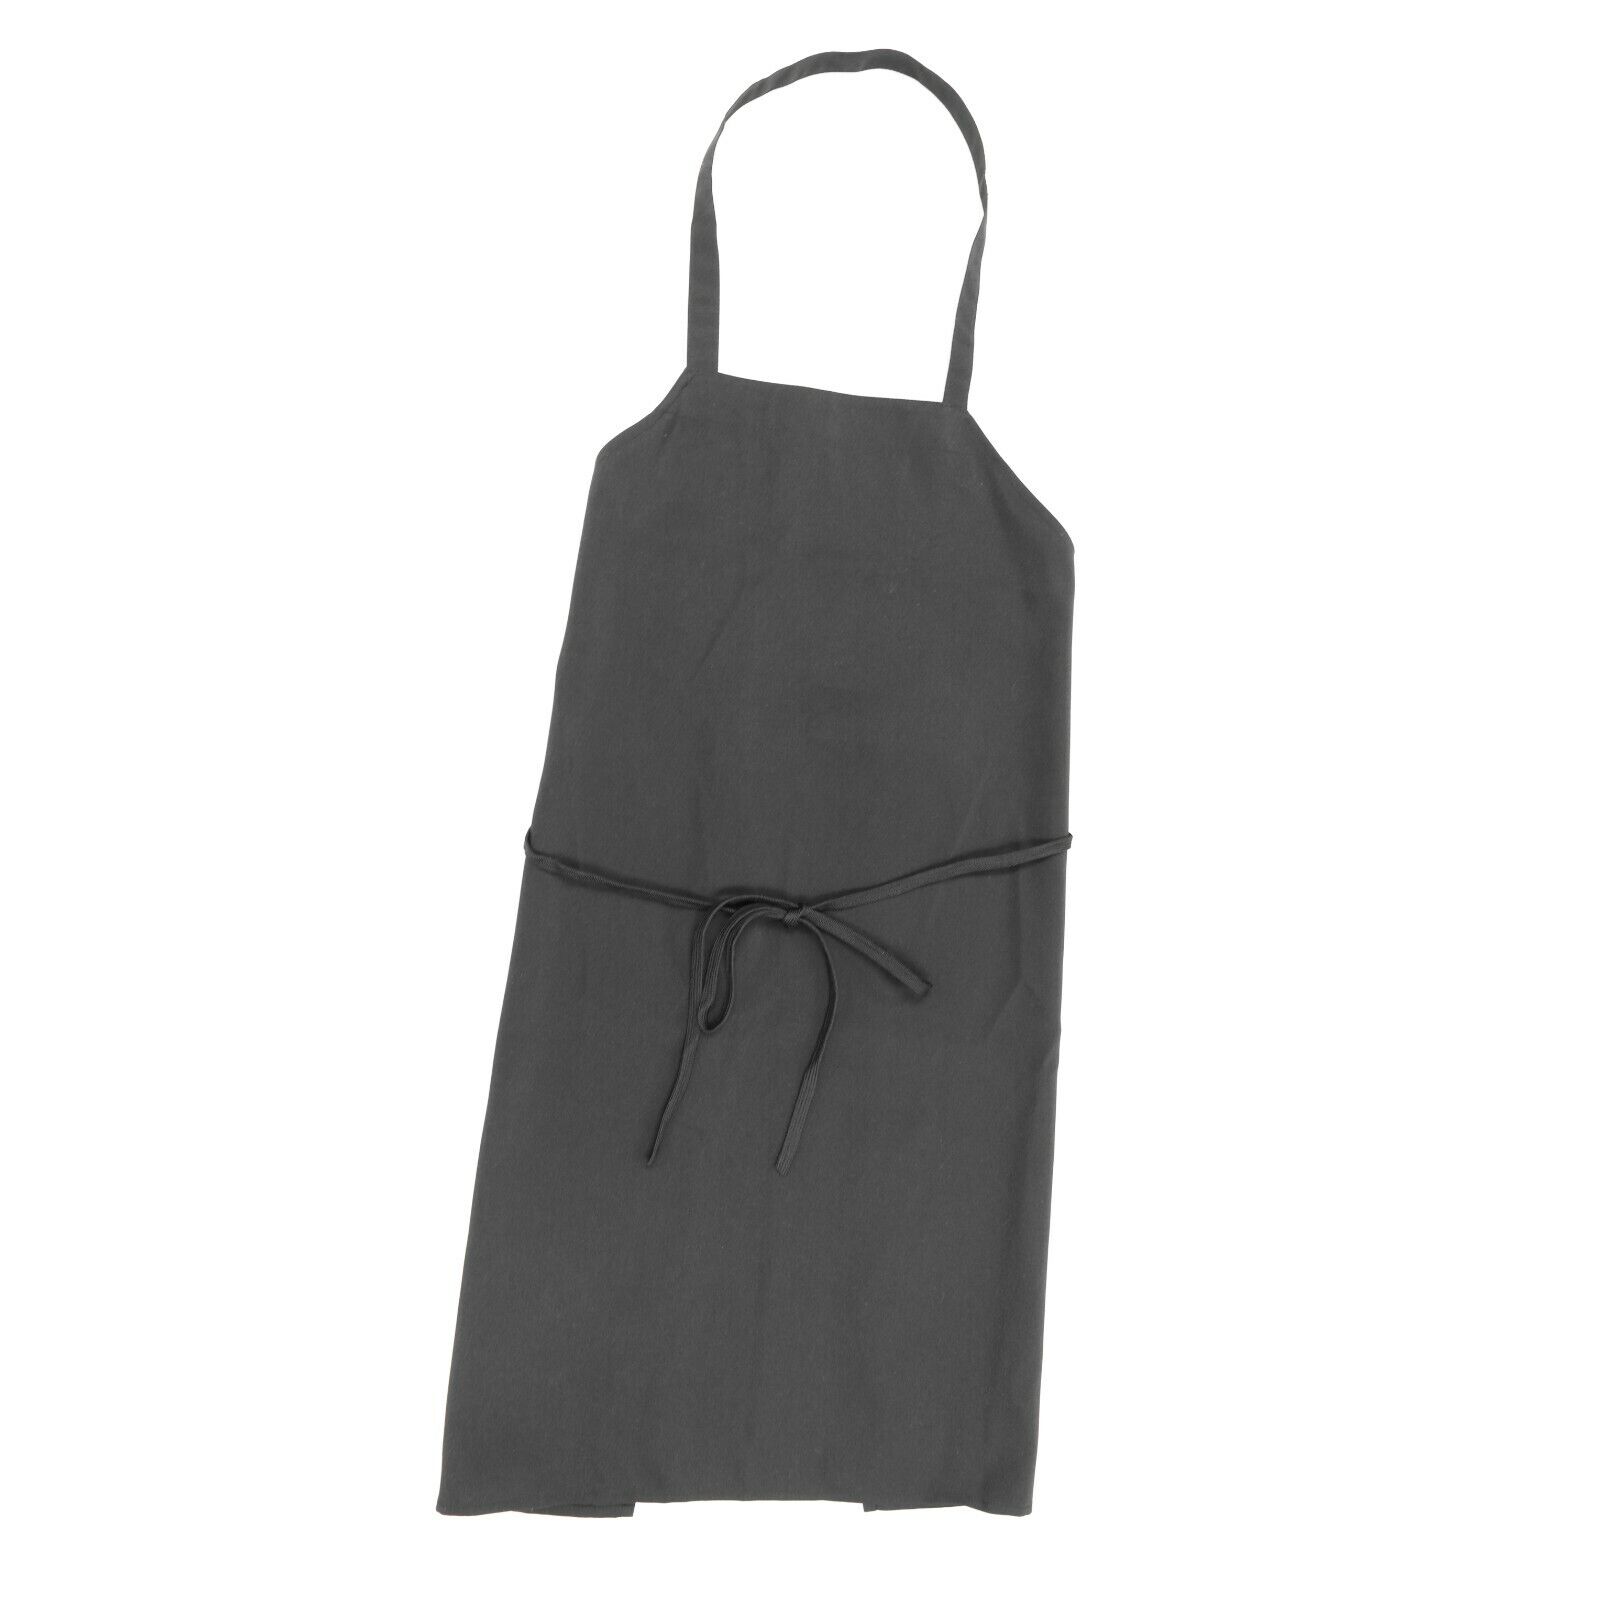 12 Pack of Kitchen Aprons - Full Bib Size Polyester Apron - Black Red or White Arkwright Does Not Apply - фотография #8